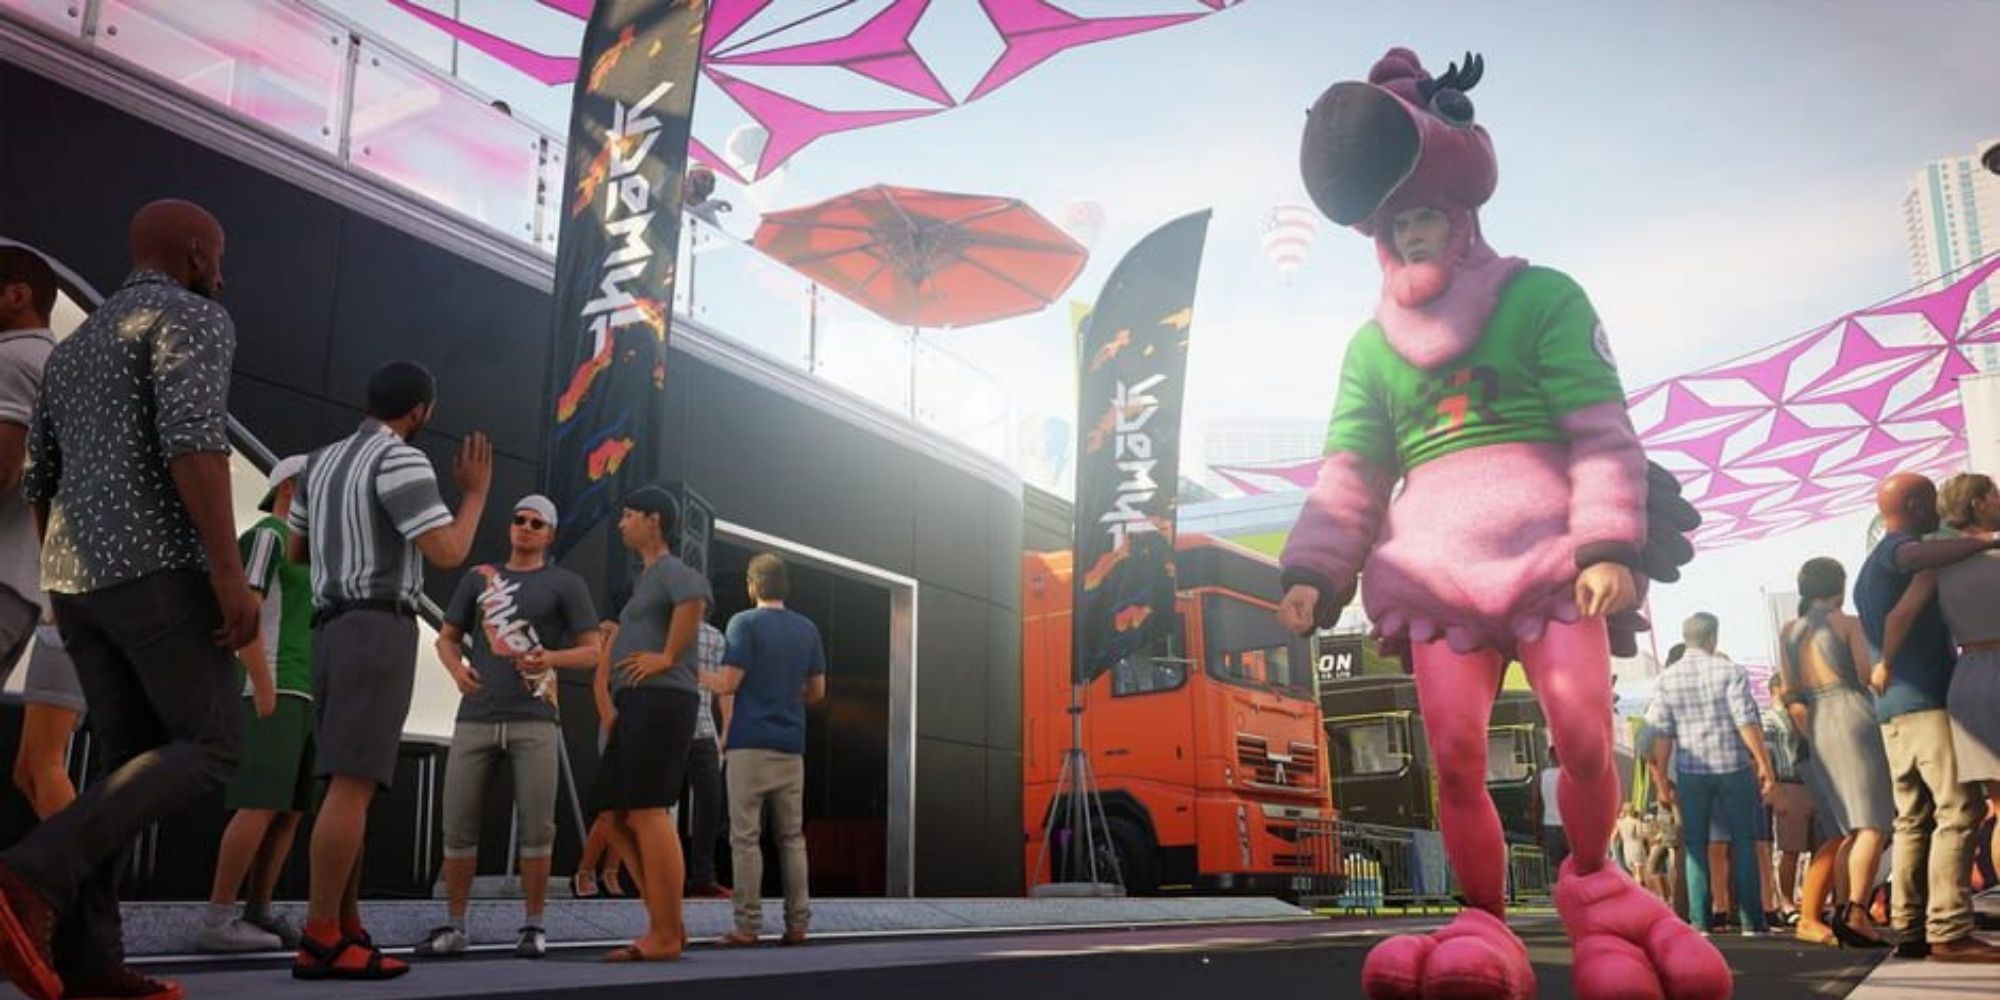 Hitman 2 - Agent 47 disguised as a mascot in Miami